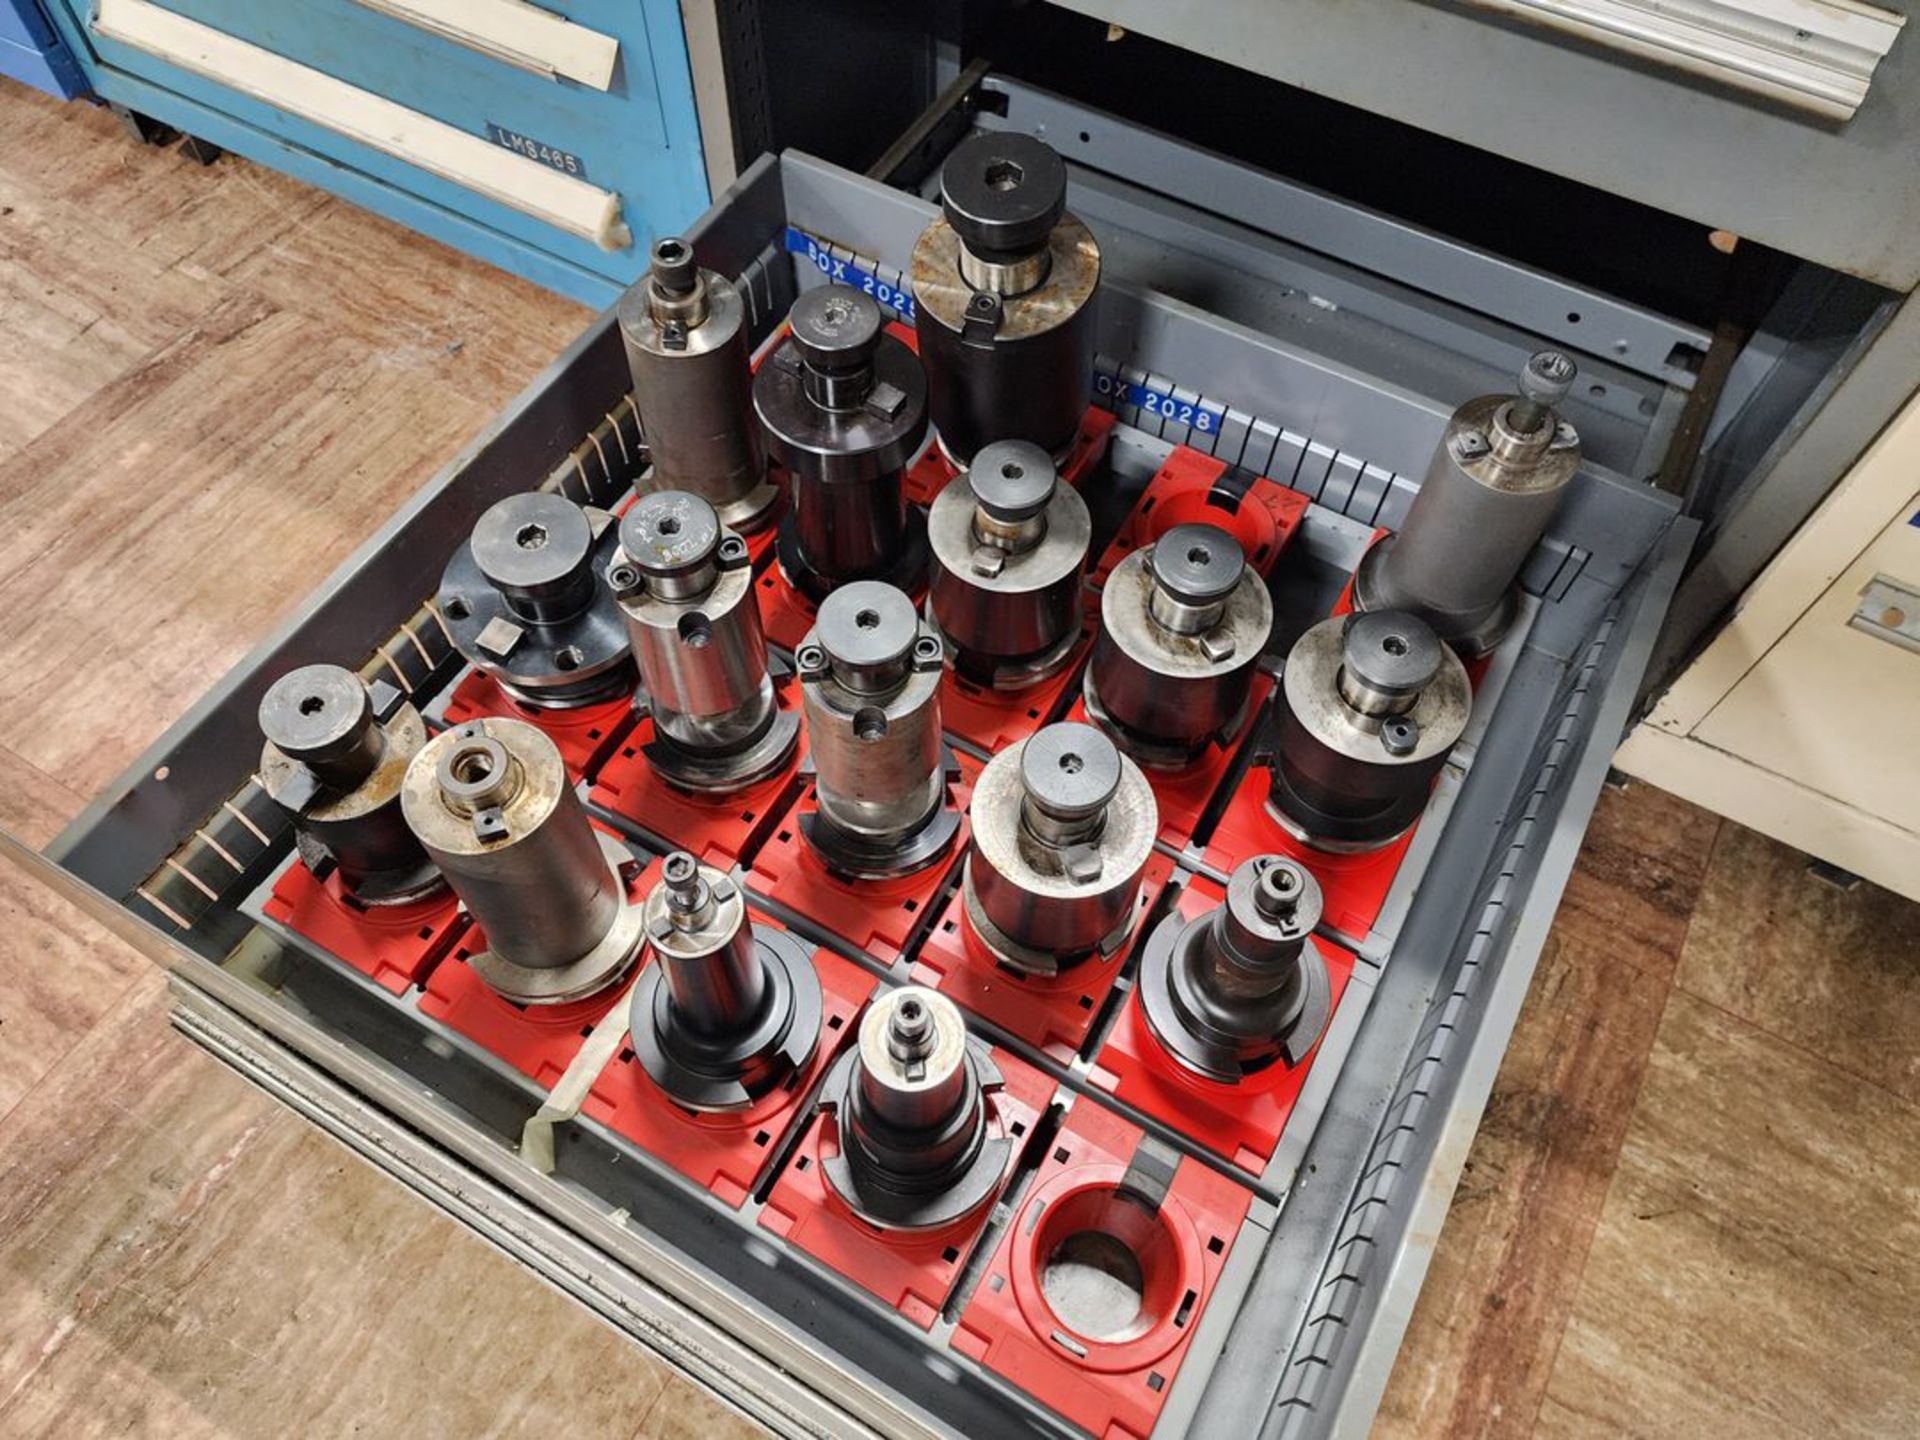 Lista Modular Matl. Cabinet W/ (28) BT50 Tapers; W/ Contents - Image 12 of 12